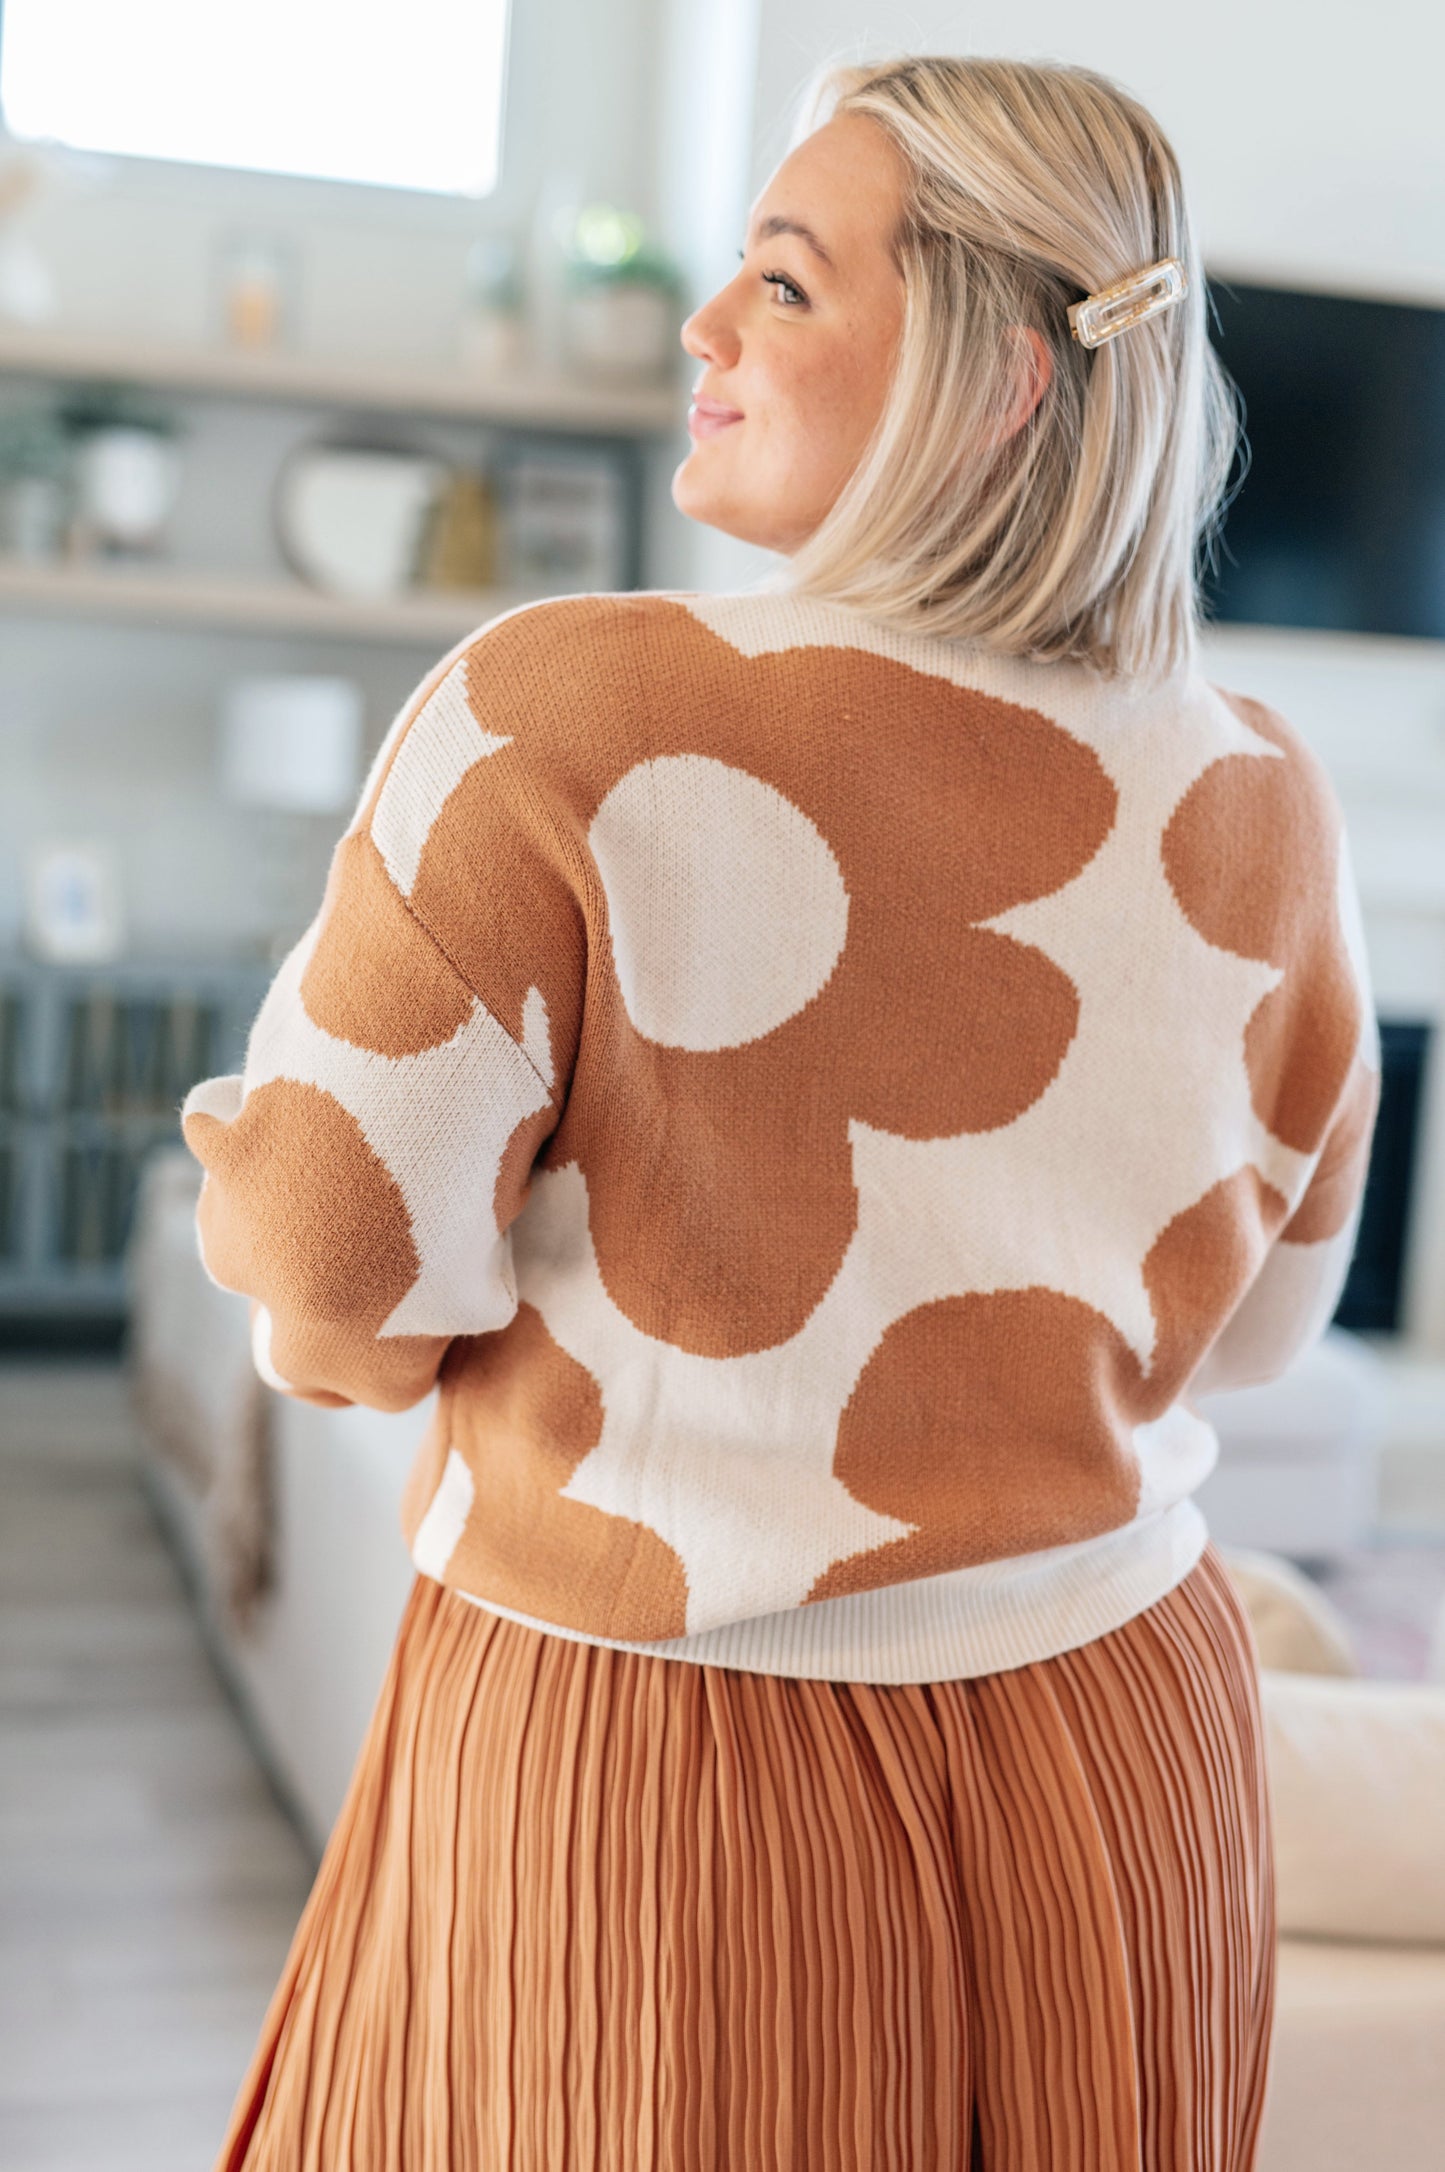 Coming Up Daisies Mod Floral Sweater   